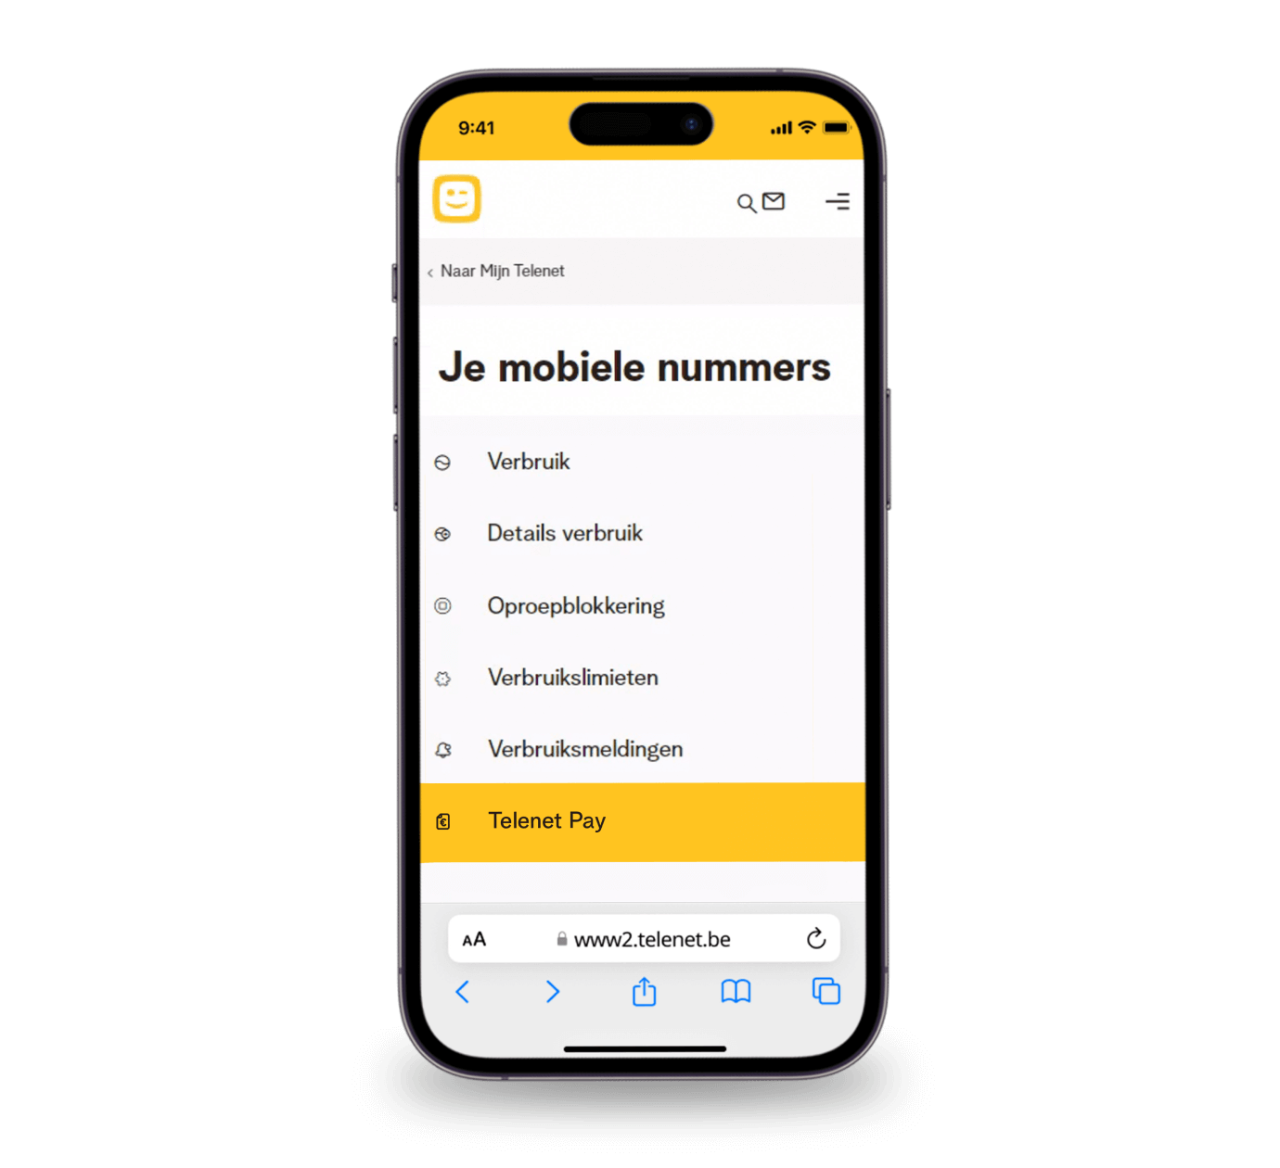 A smartphone with My Telenet and an overview of your mobile numbers with Telenet Pay as an option.